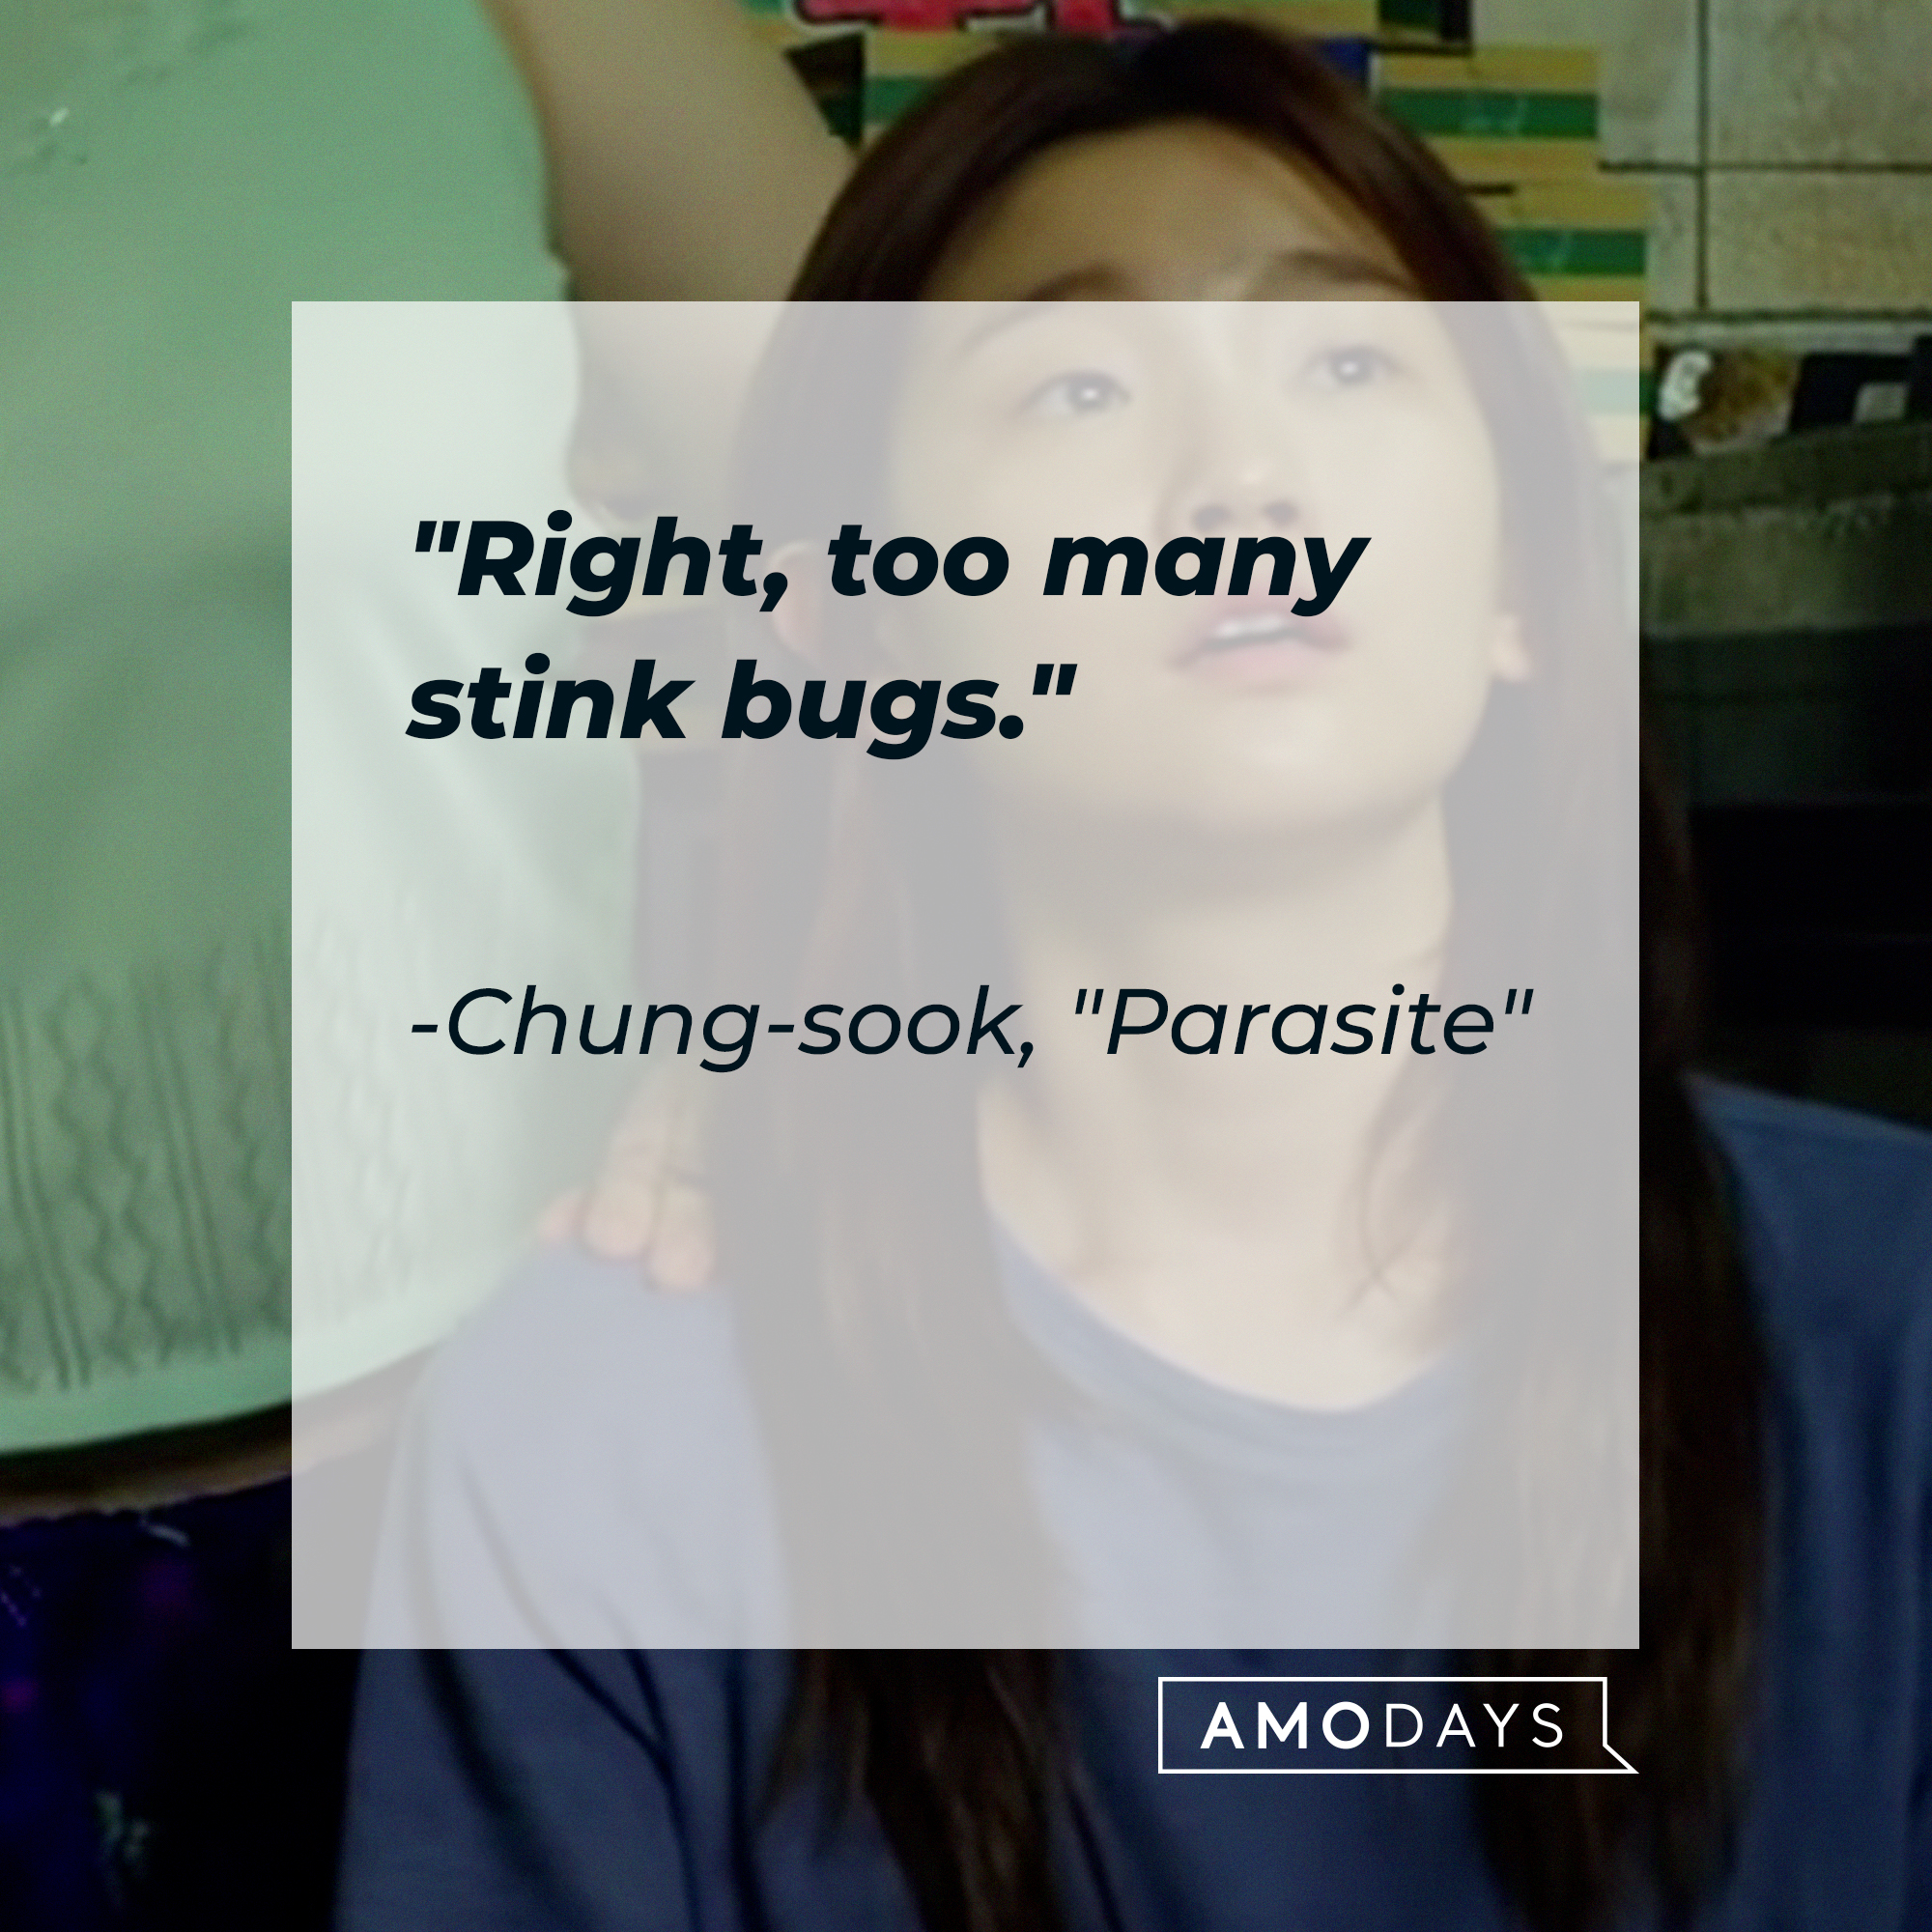 Ki-jung with Chung-sook's quote: "Right, too many stink bugs." | Source: Facebook.com/ParasiteMovie